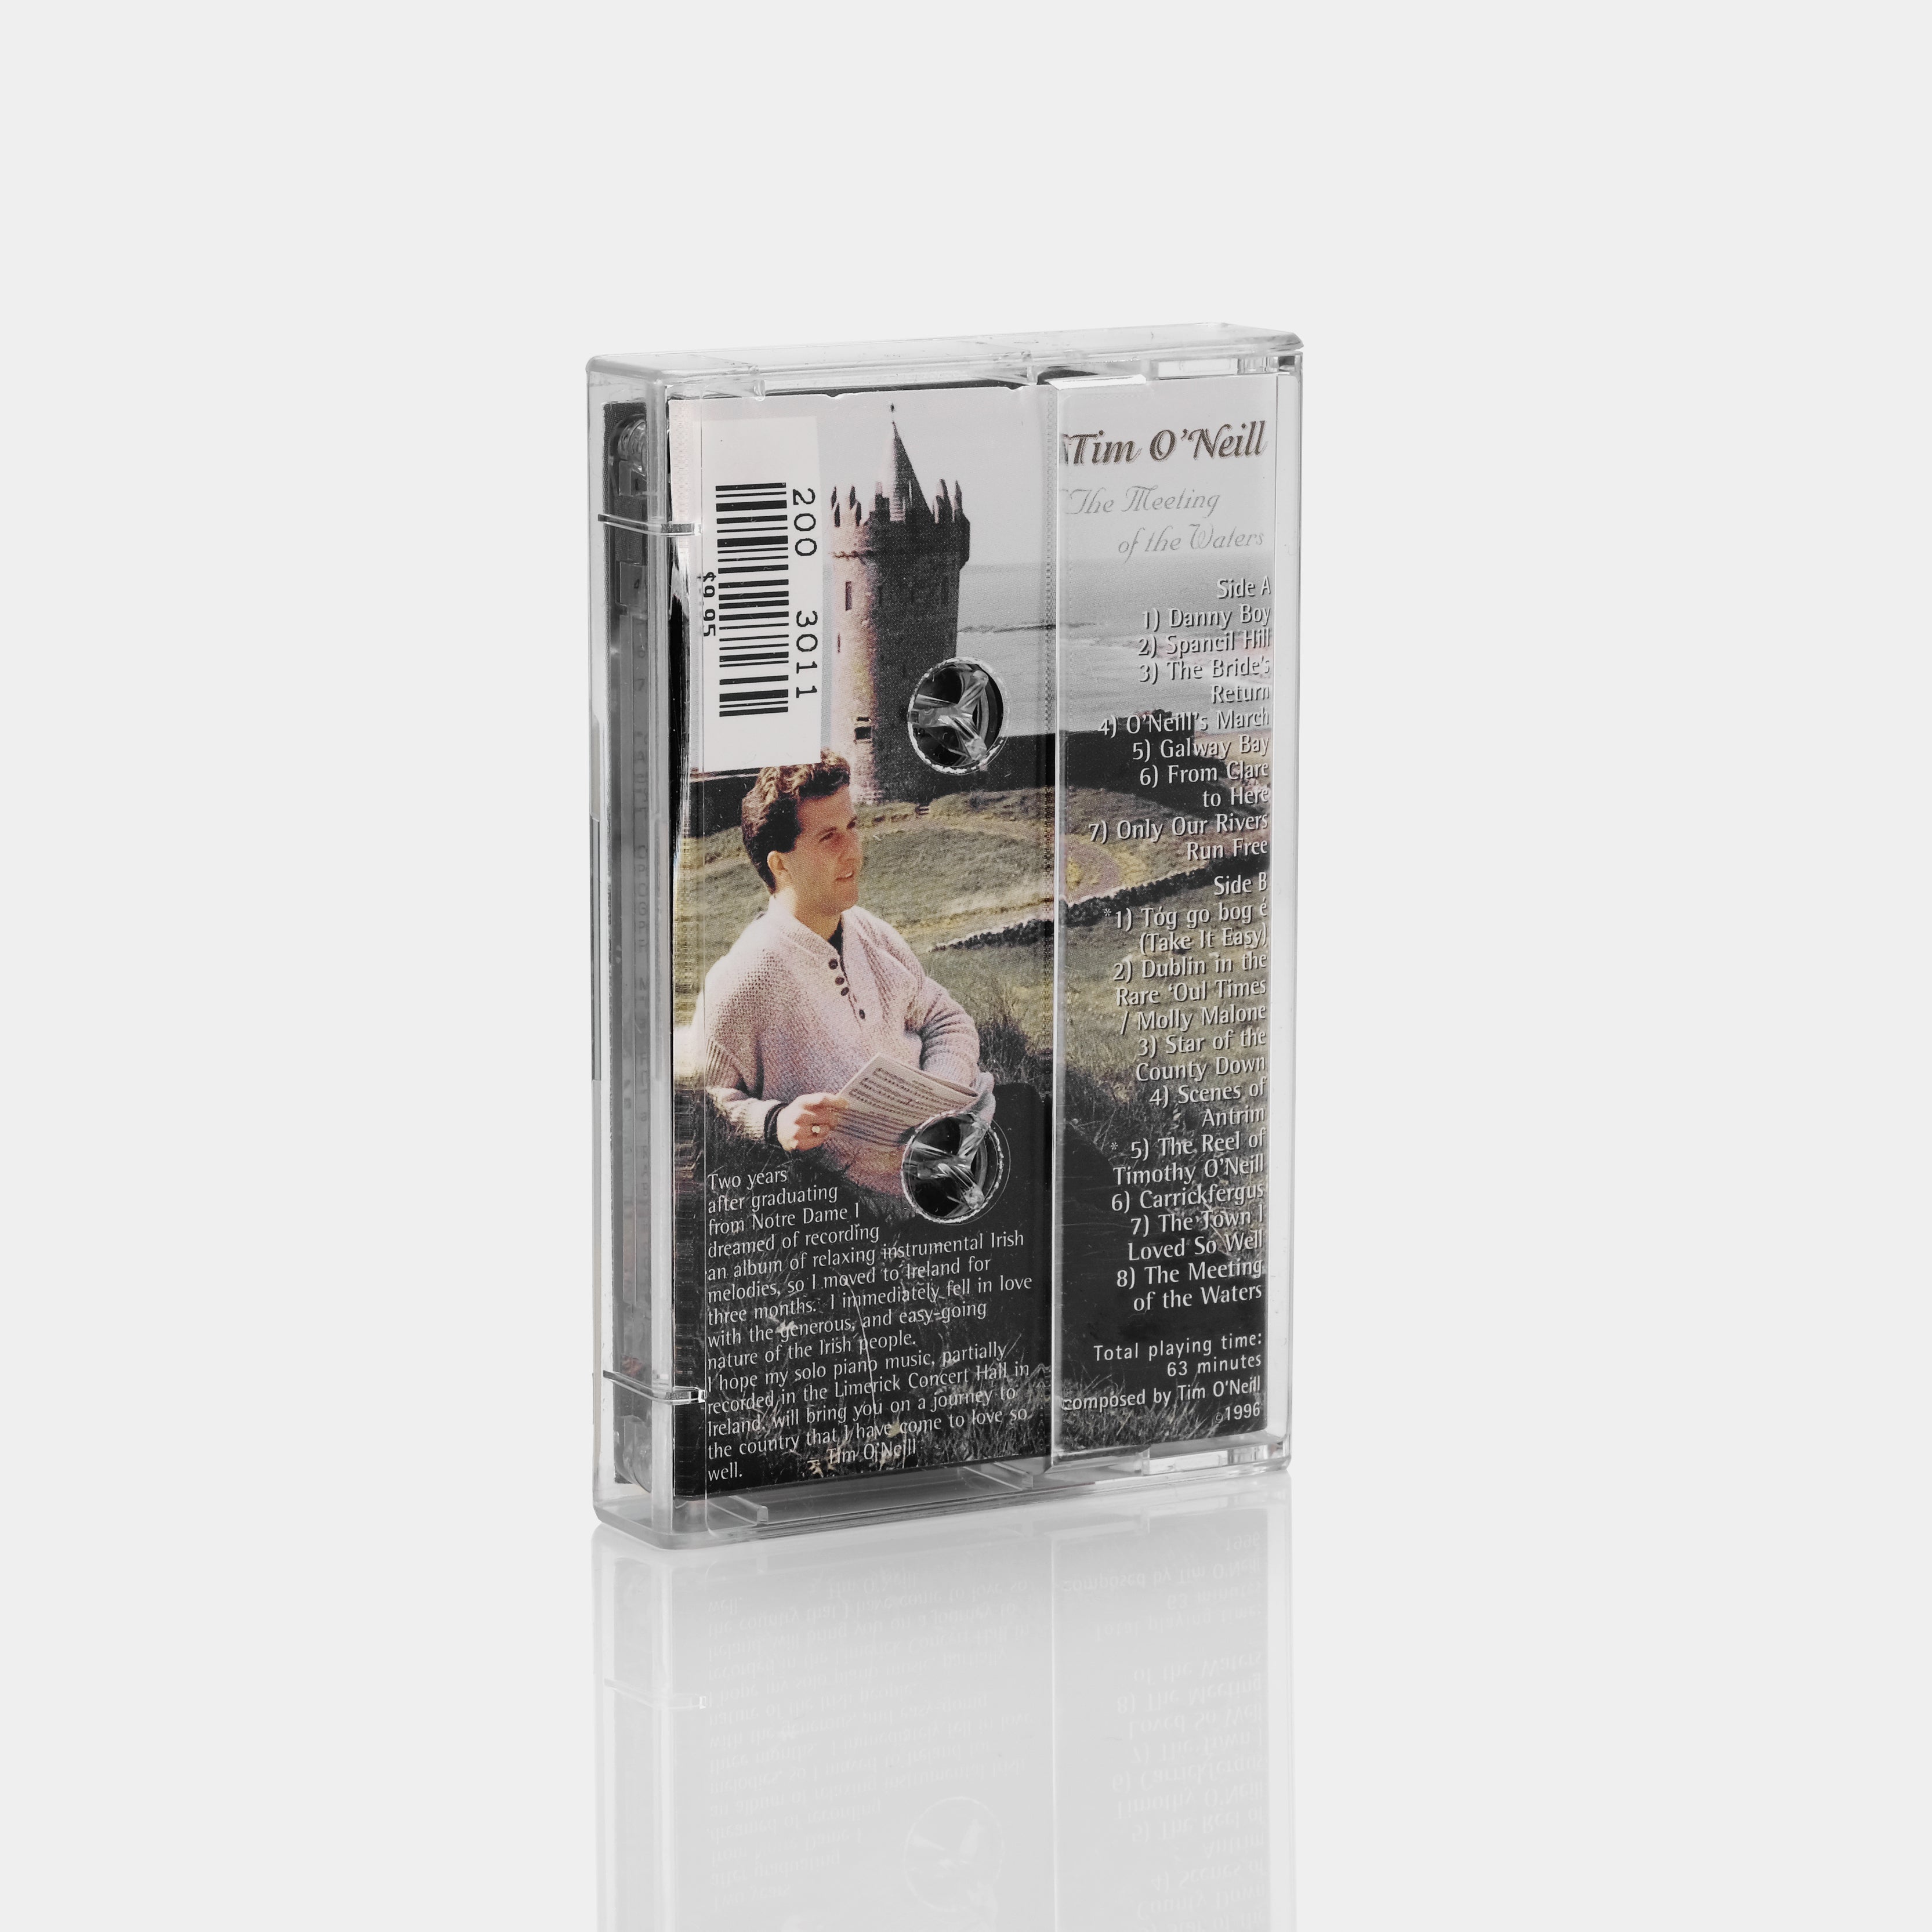 Tim O'Neill - The Meeting Of The Waters Cassette Tape